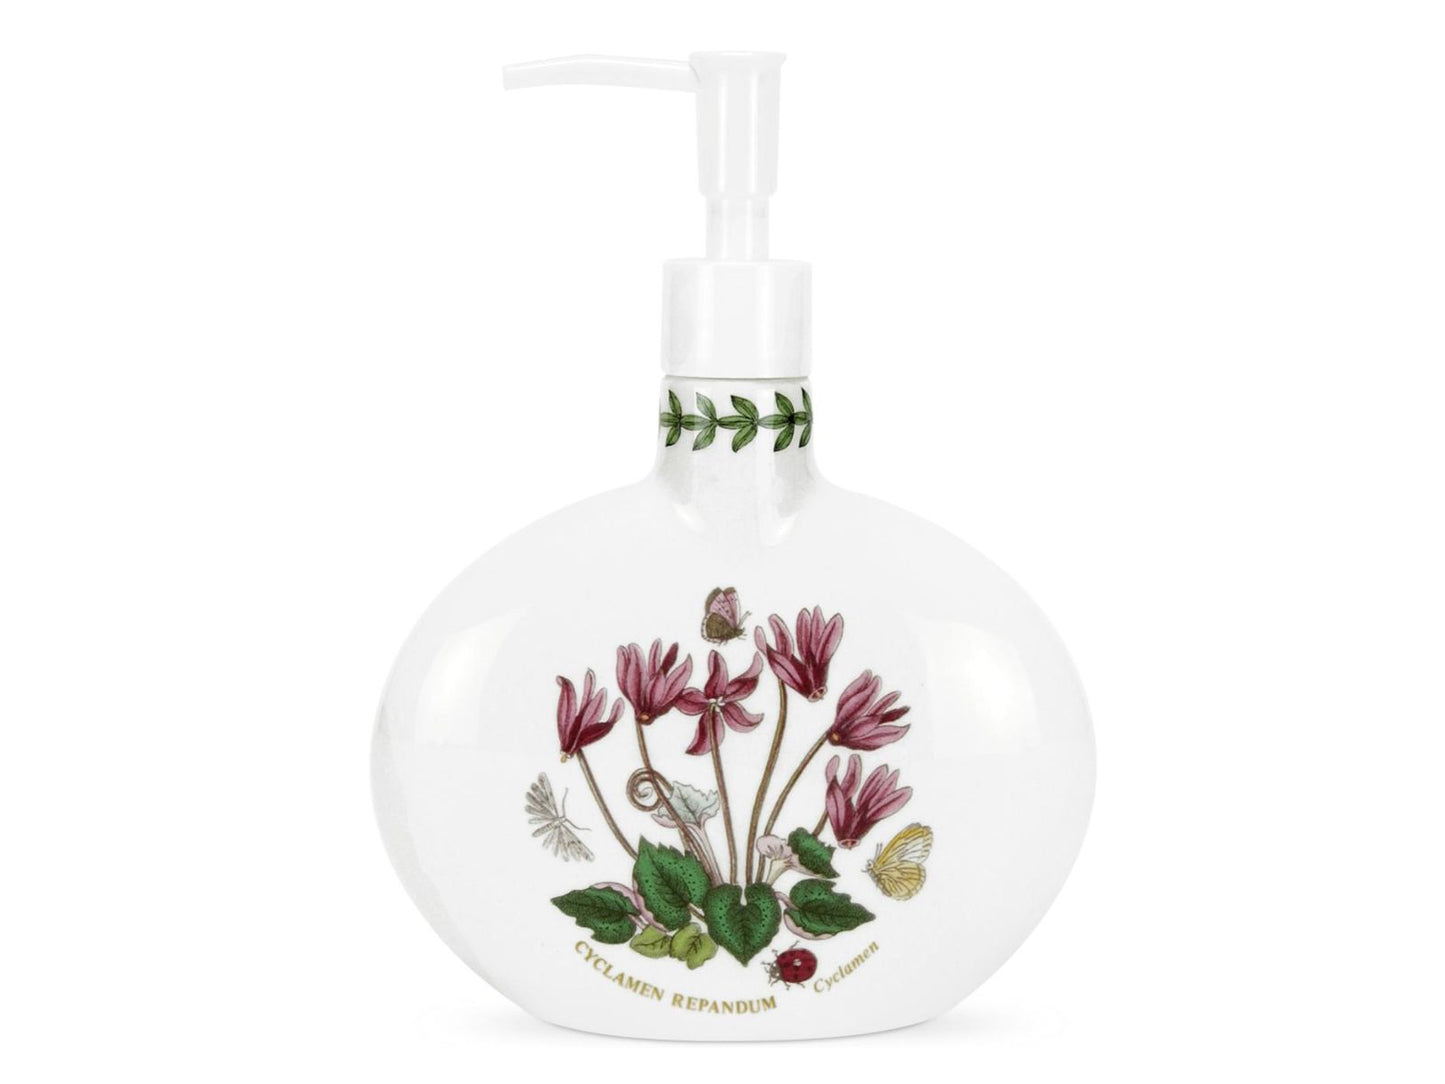 A white porcelain dispenser with an oval body and slim neck, featuring a laurel trim around the neck and a cyclamen design on the body. It has a white plastic pump.